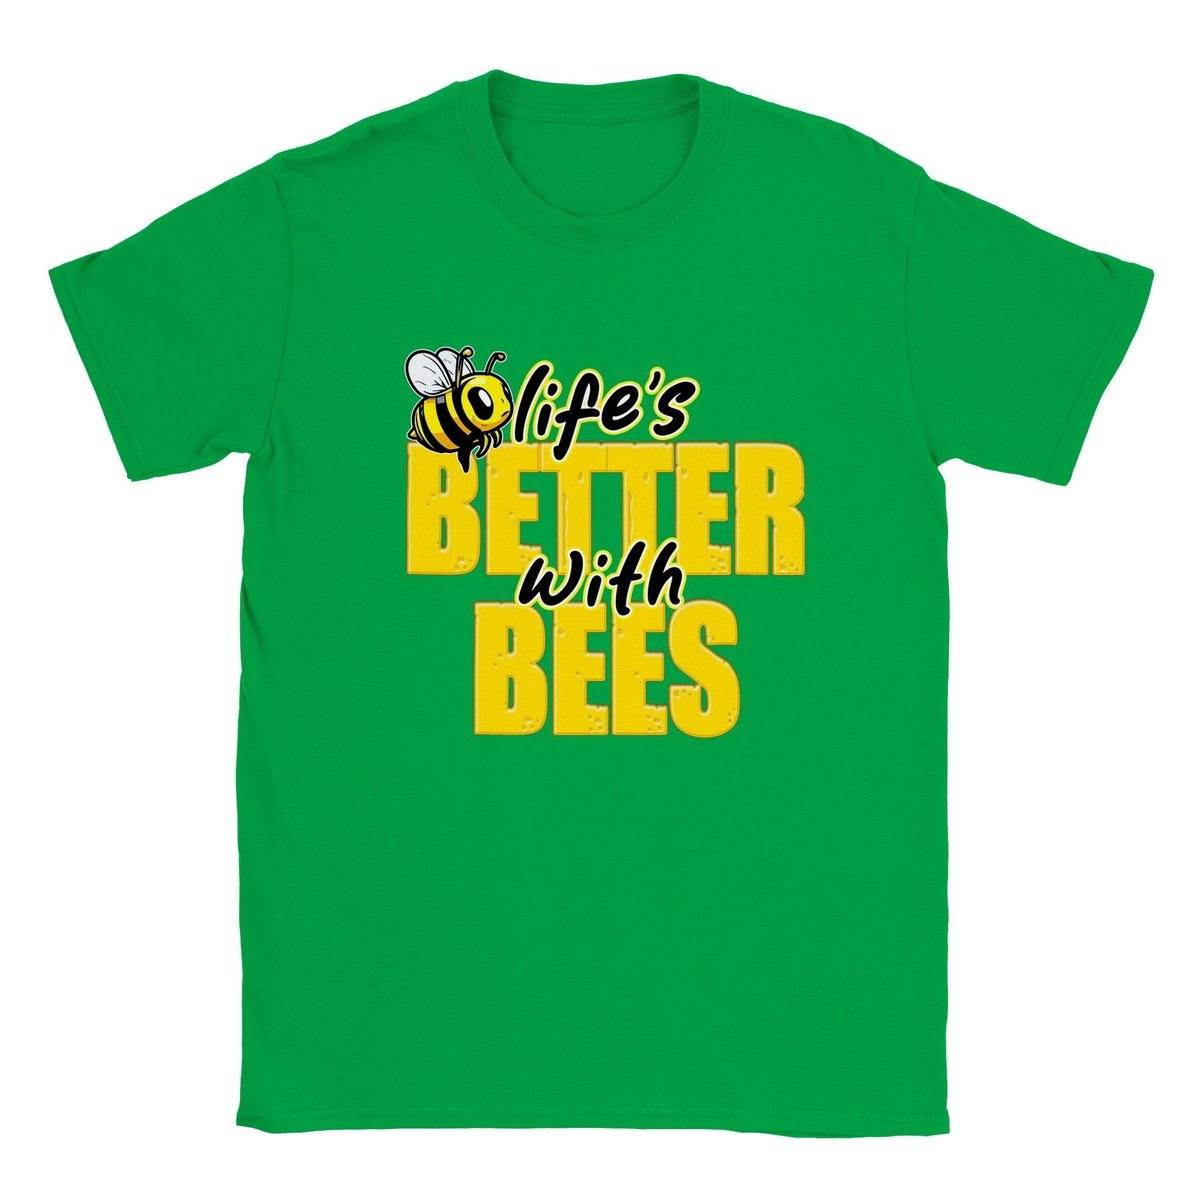 Lifes Better With Bees Kids T-shirt Australia Online Color Irish Green / XS